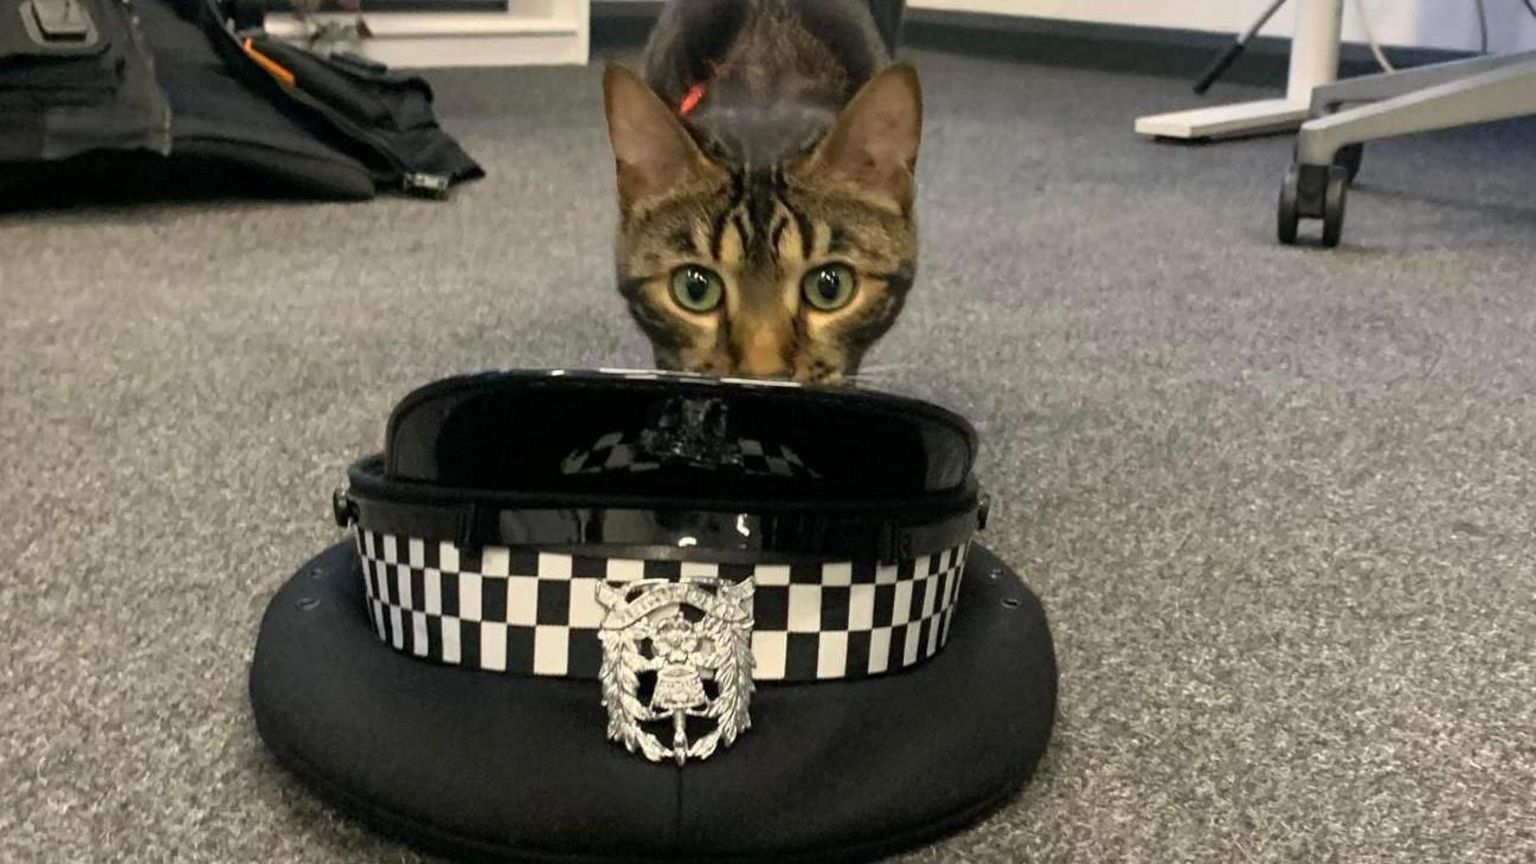 Tilly the cat with police hat